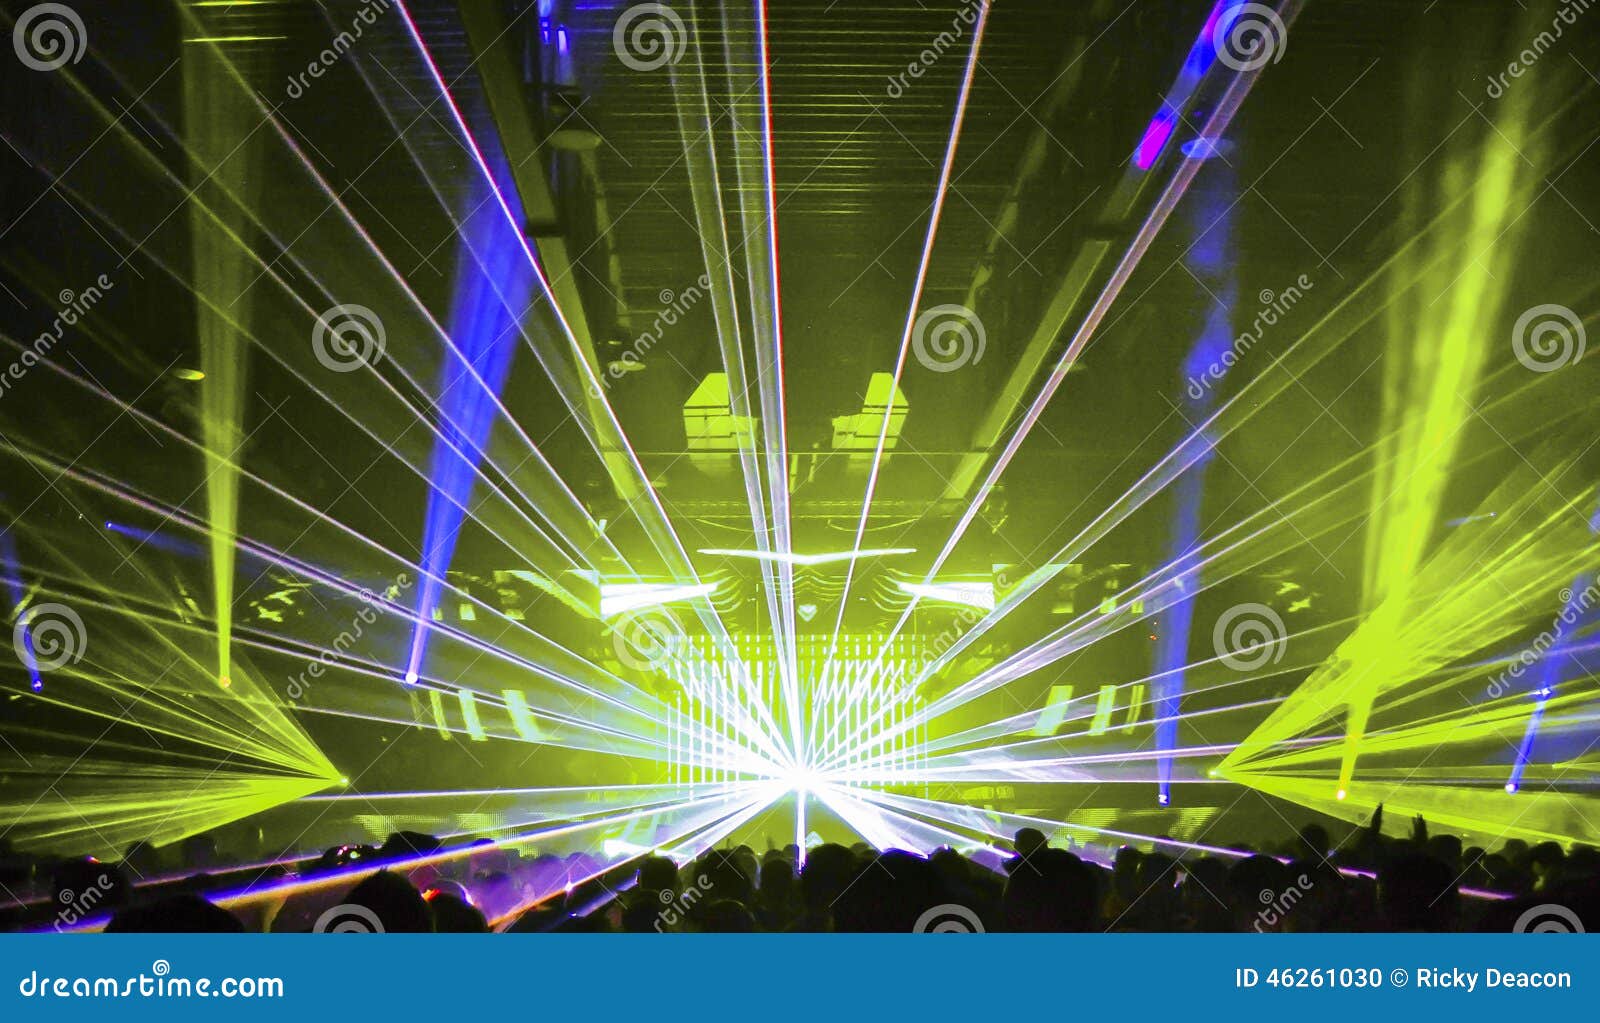 nightclub lasers and crowd